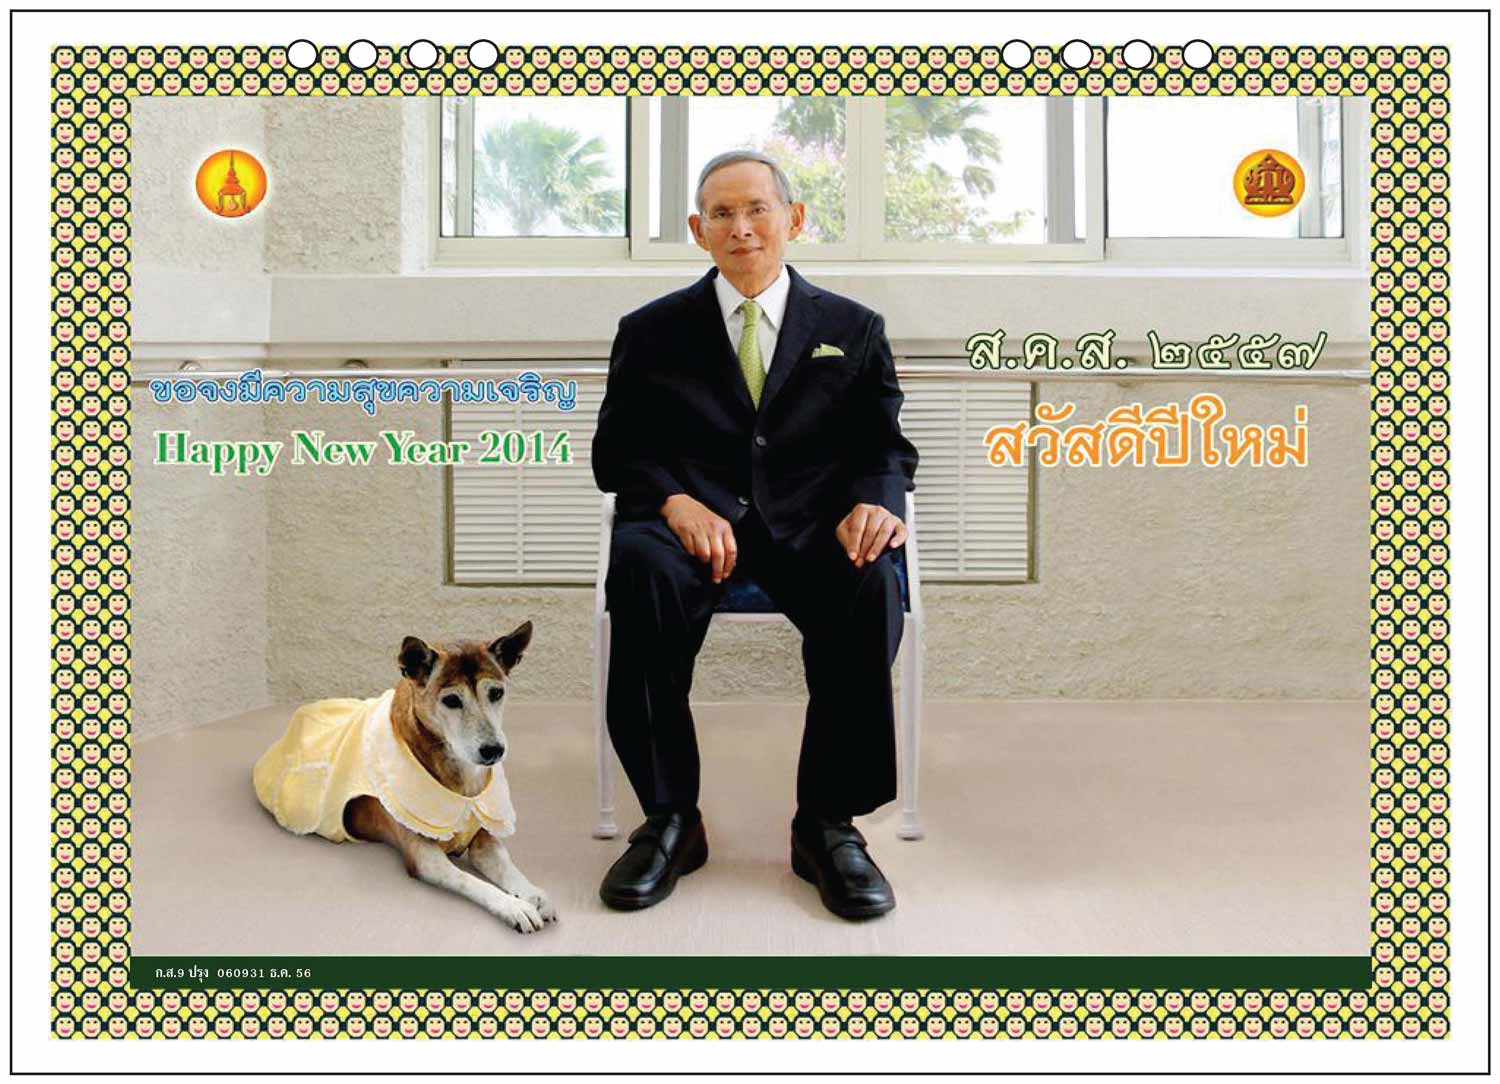 His Majesty King Bhumibol's New Year card for 2014, the last one to feature Tongdaeng as she would die the following December. The card for 2016 bore a photo of the king wearing a jacket with a Tongdaeng logo on it.